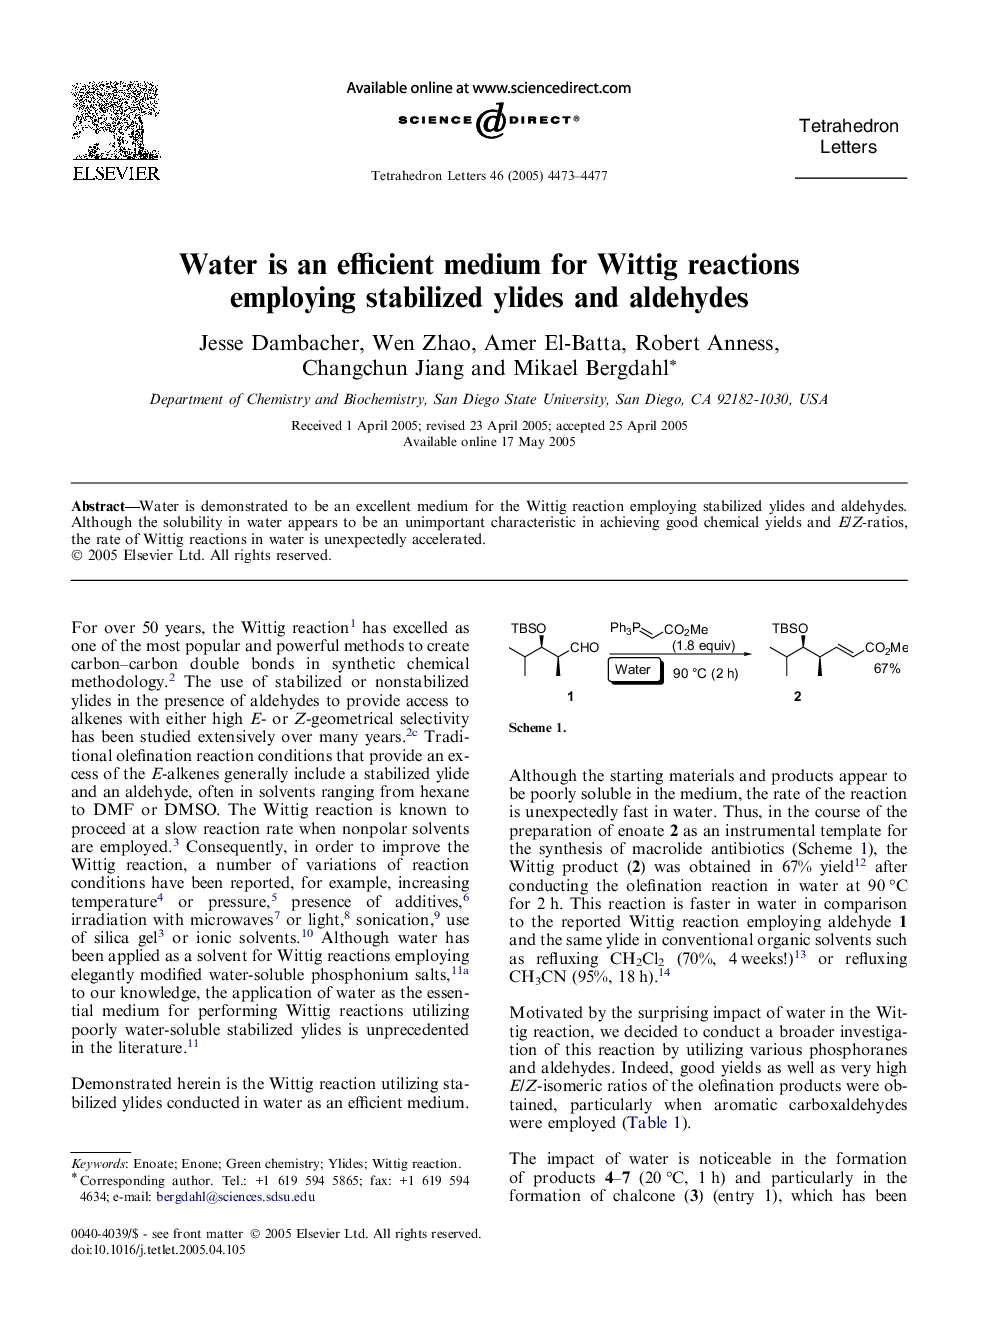 Water is an efficient medium for Wittig reactions employing stabilized ylides and aldehydes